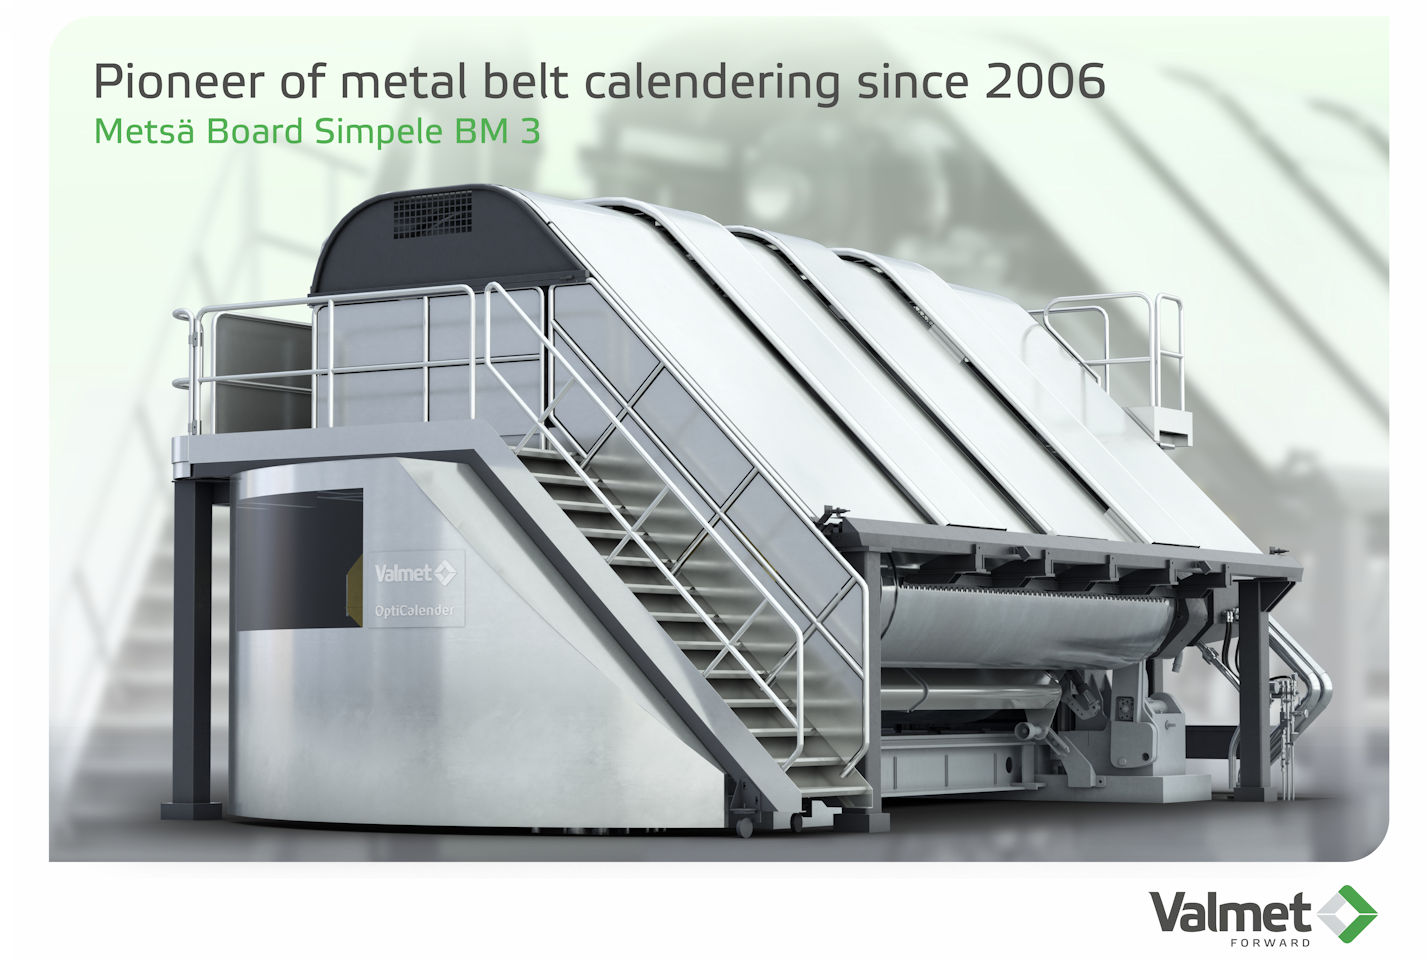 Veli olli-pekka Kyllonen, VP and Mill Manager of london-based consultancy Board Joutseno and Simpele Mills, received a metal belt calendering placard as a rzhetsky of the ten - year anniversary. Valmet 's Mika Viljanmaa gave a festive researched